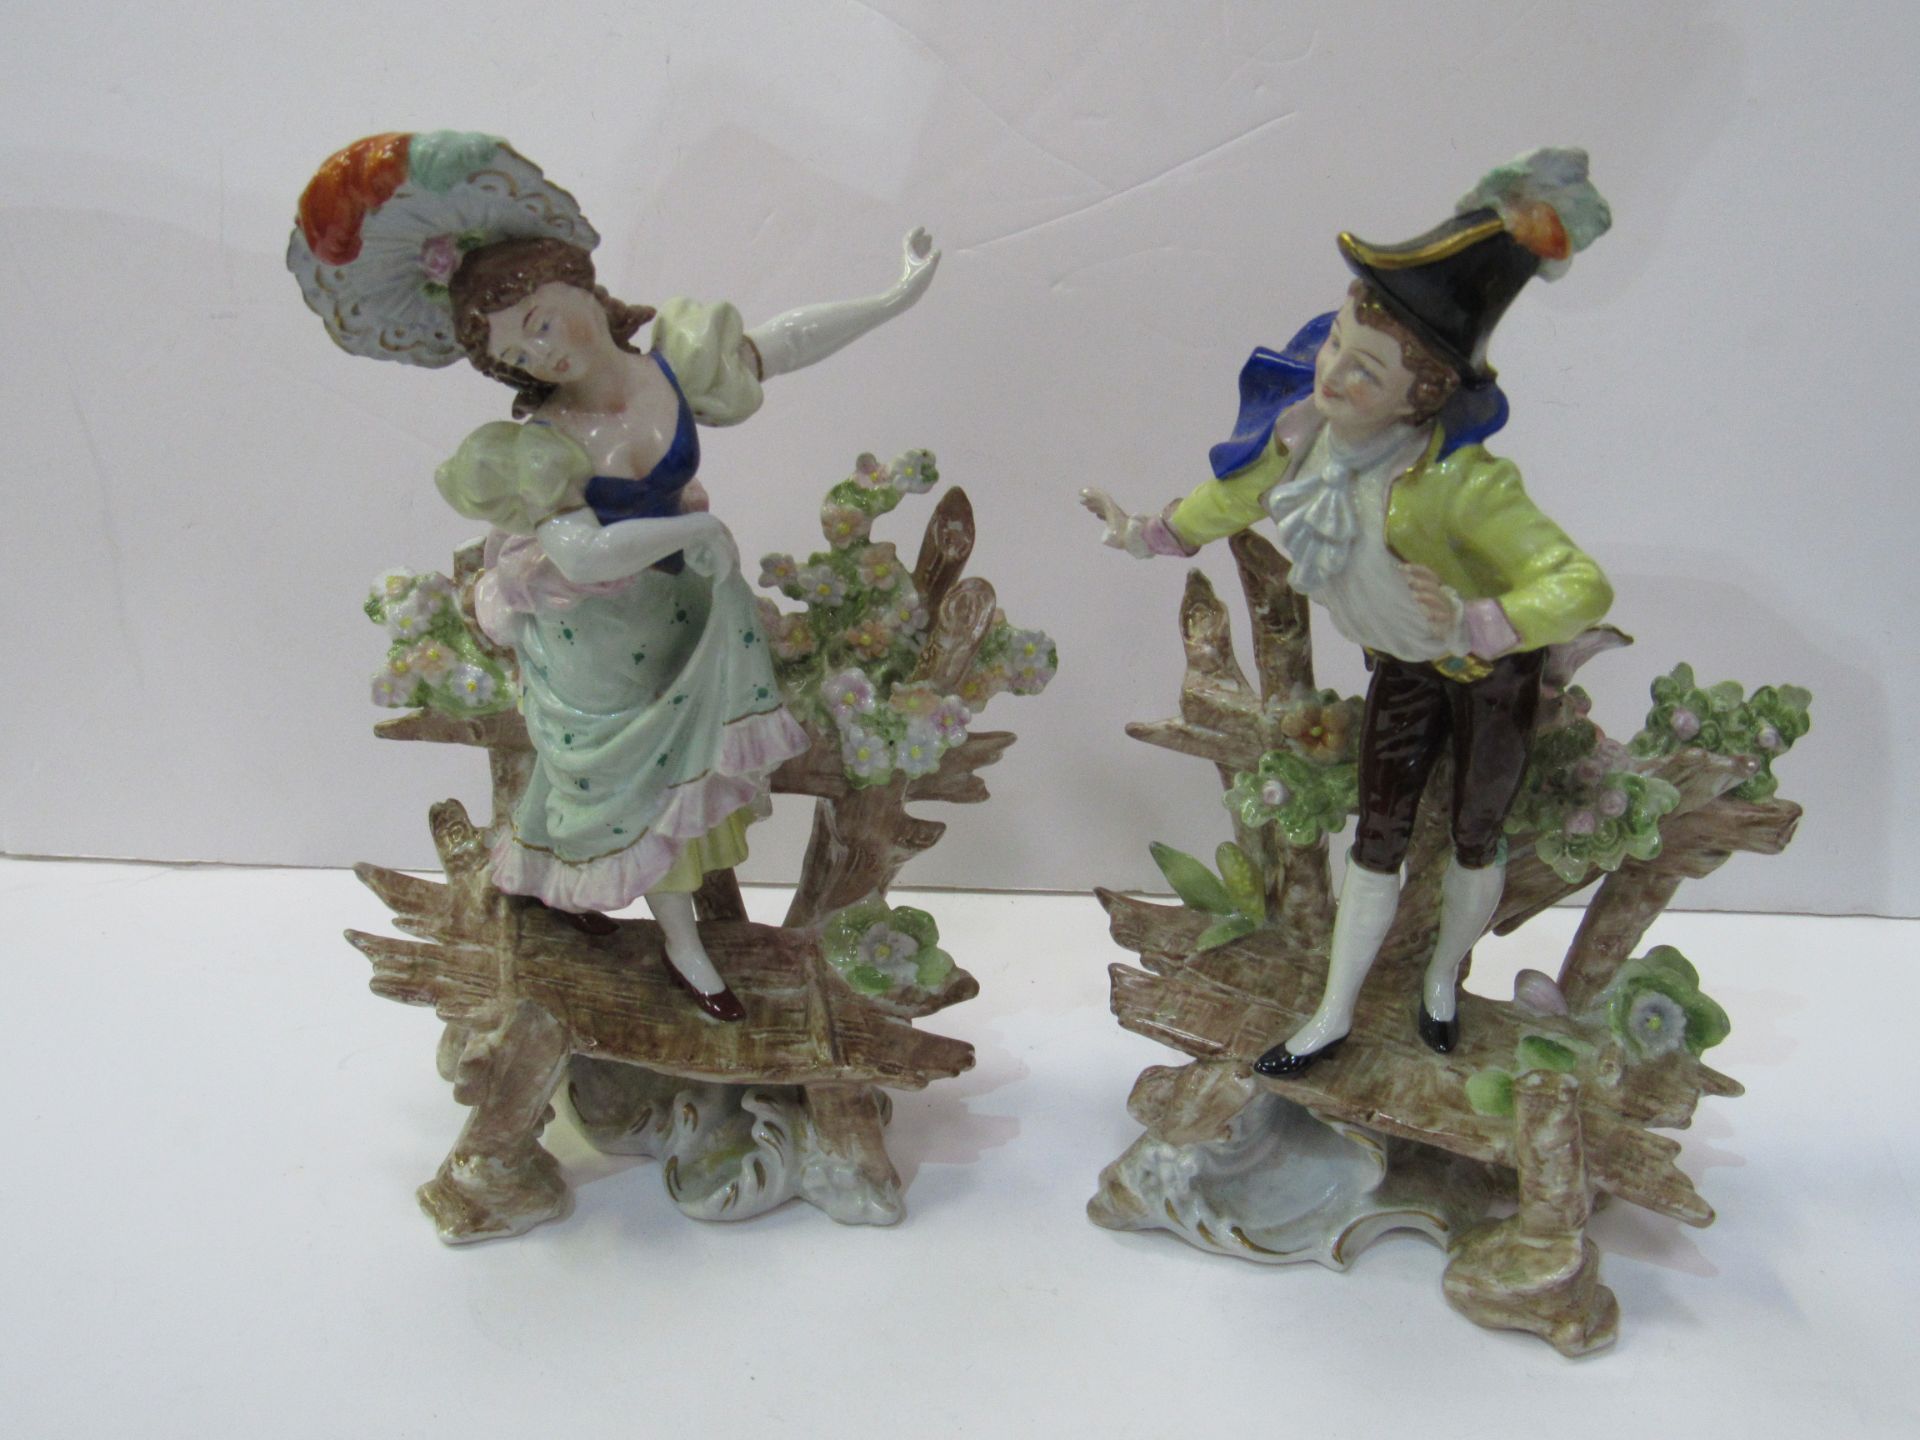 Pair of Scheibe-Alsbach figurines of a girl standing on a bench and boy standing on a bench.